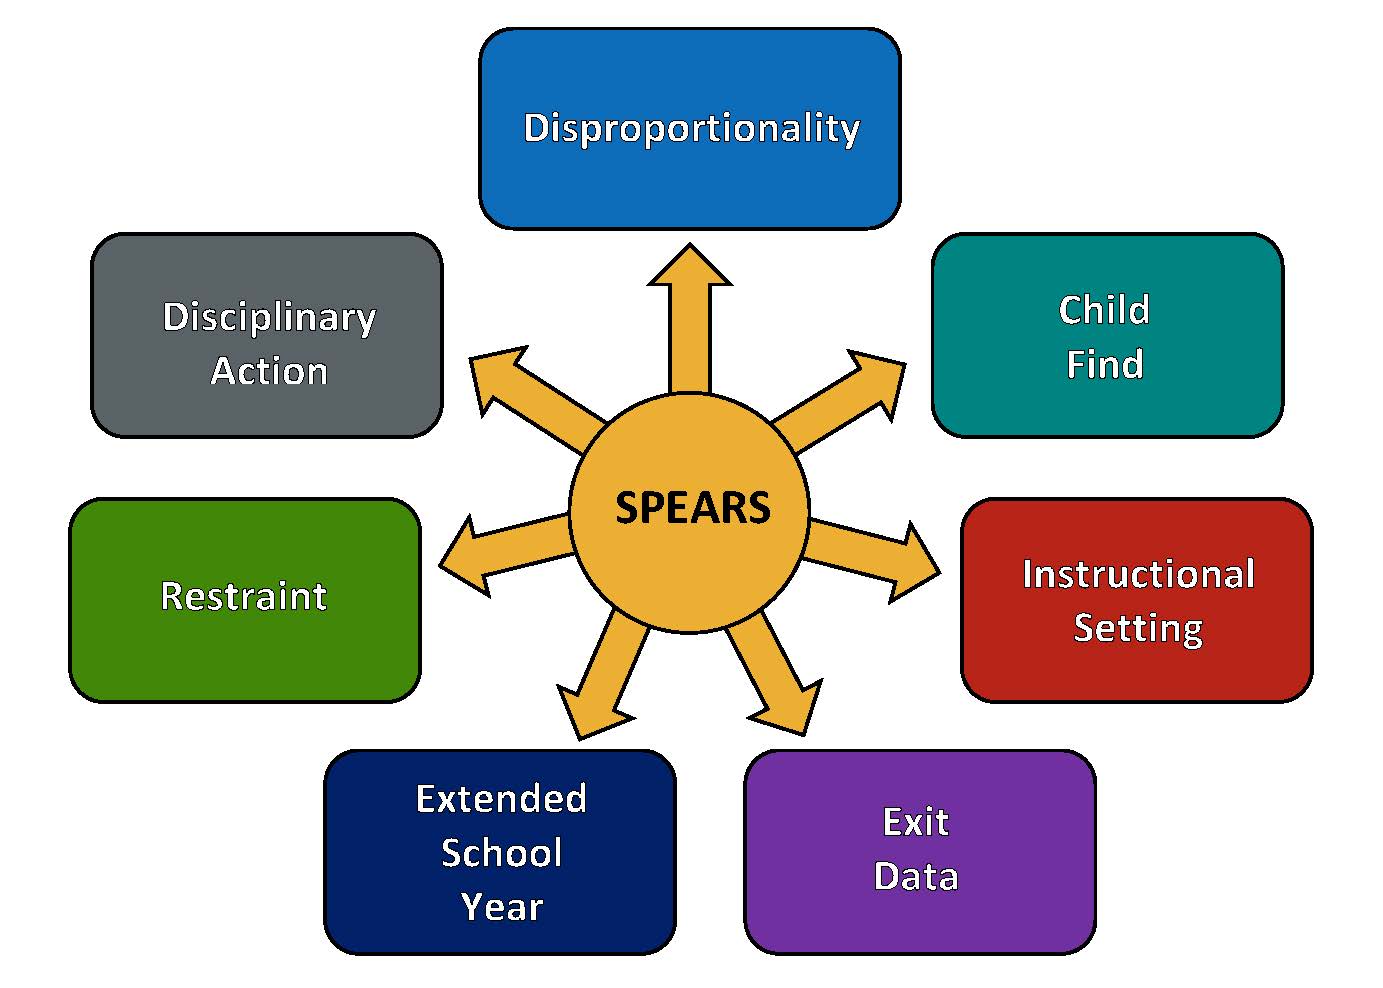 SPEARS disproportionality, Child Find, Instructional Setting, Exit Data, Extended School Year, Restraint, Discipline Action